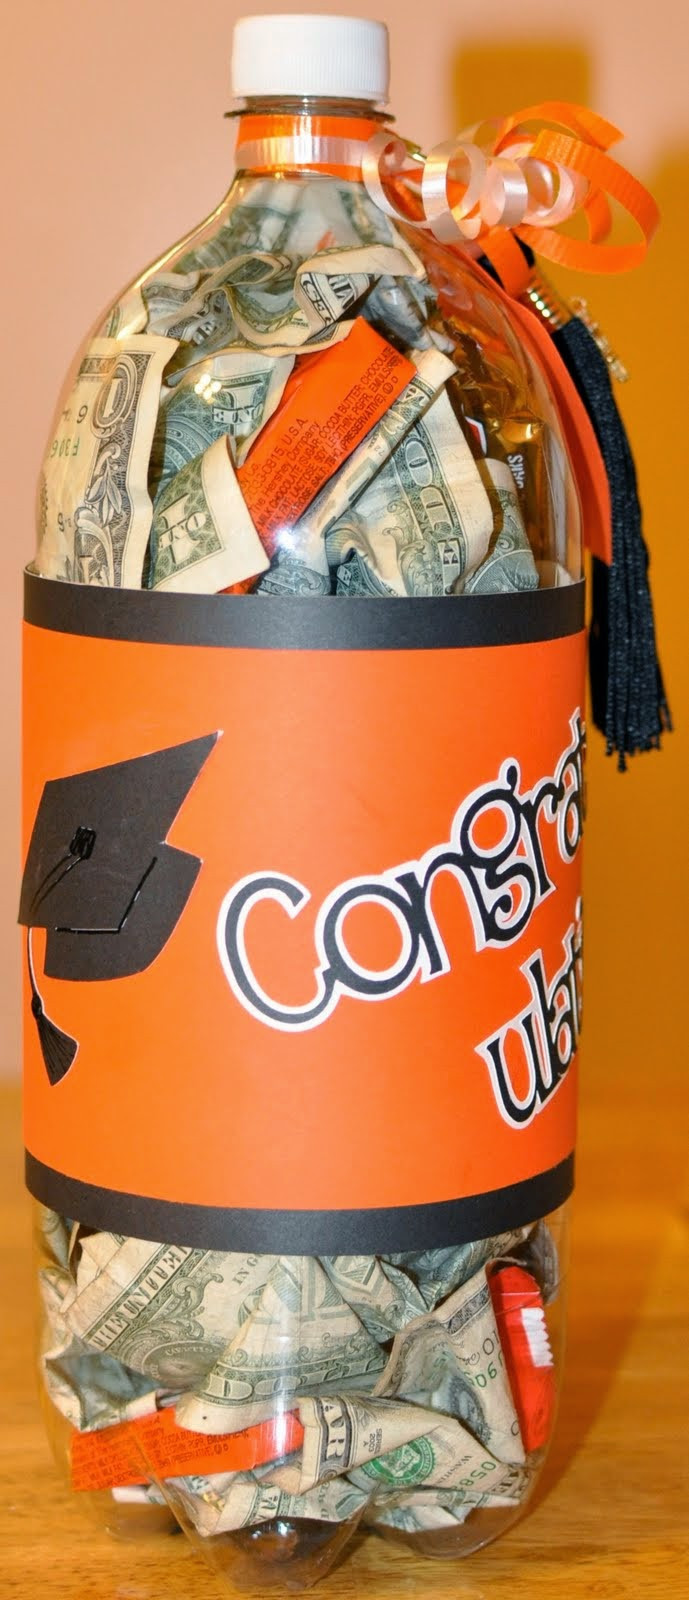 Gift Ideas For Graduation
 GIFTS THAT SAY WOW Fun Crafts and Gift Ideas Graduation